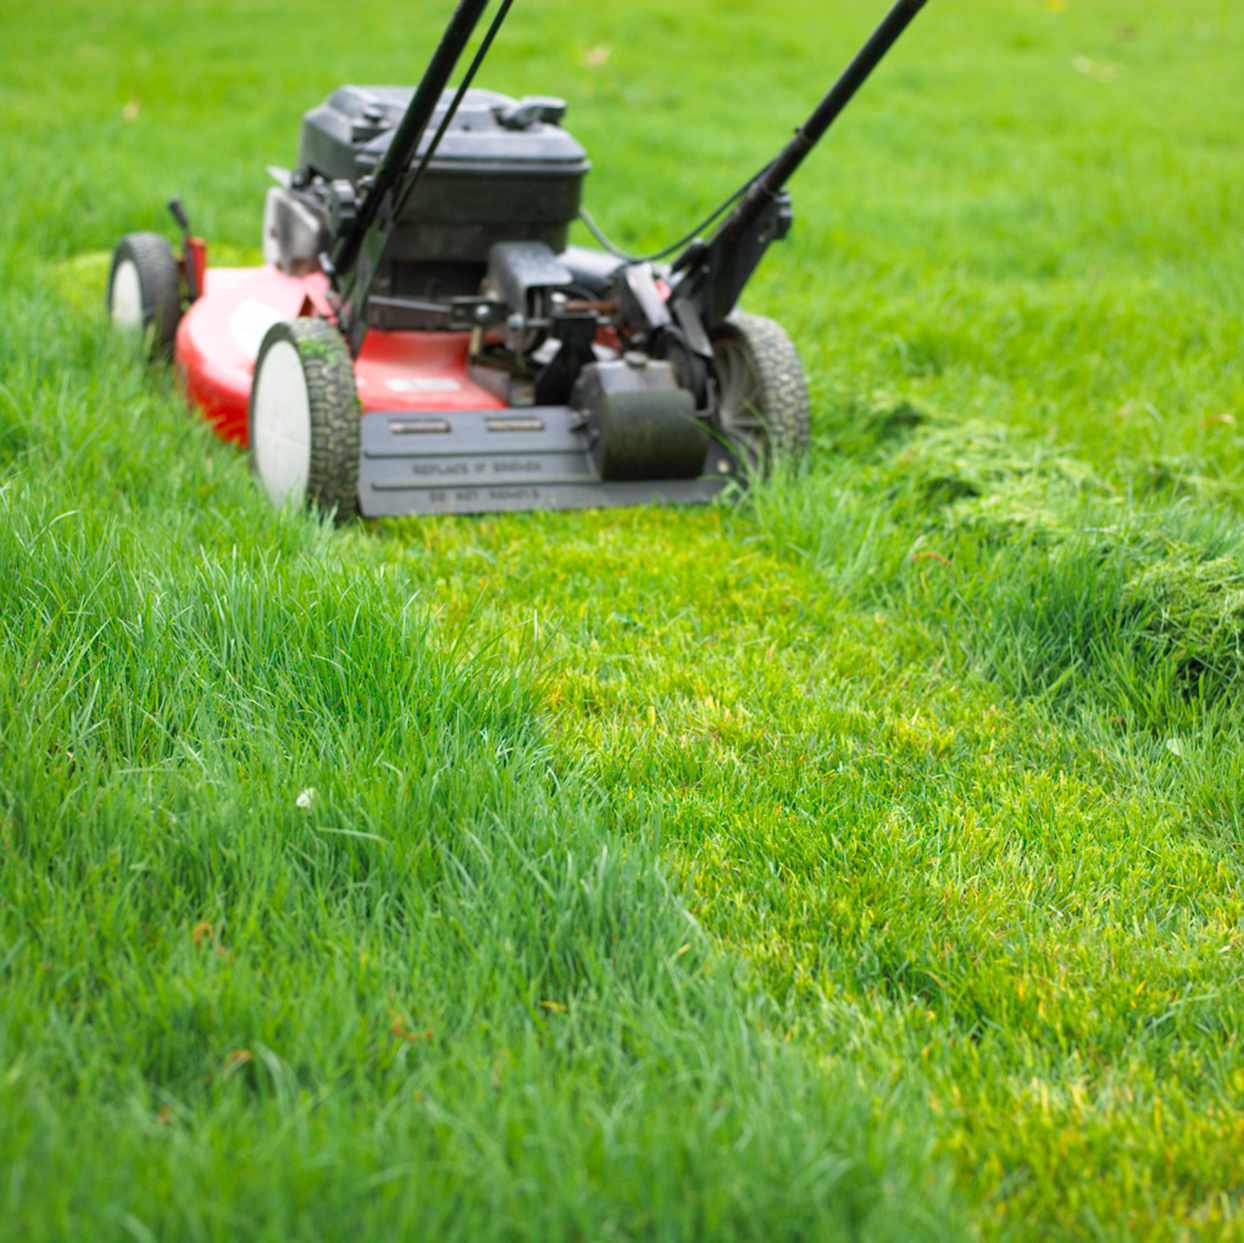 mowing grass with red lawn mower and leaving grass clippings behind